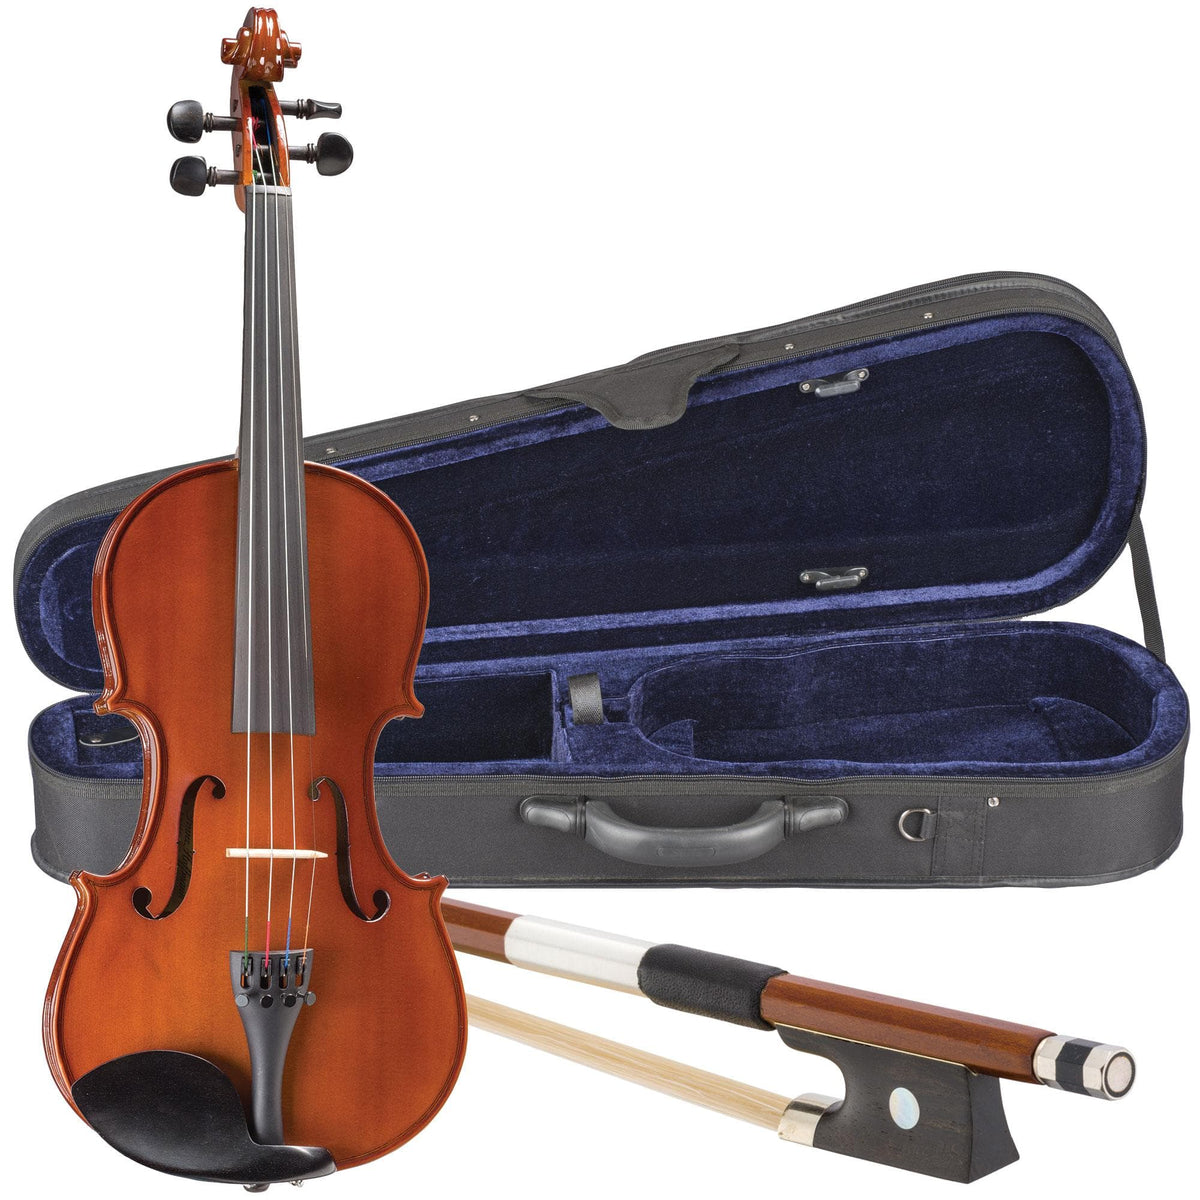 SharWay Standard Violin Outfit